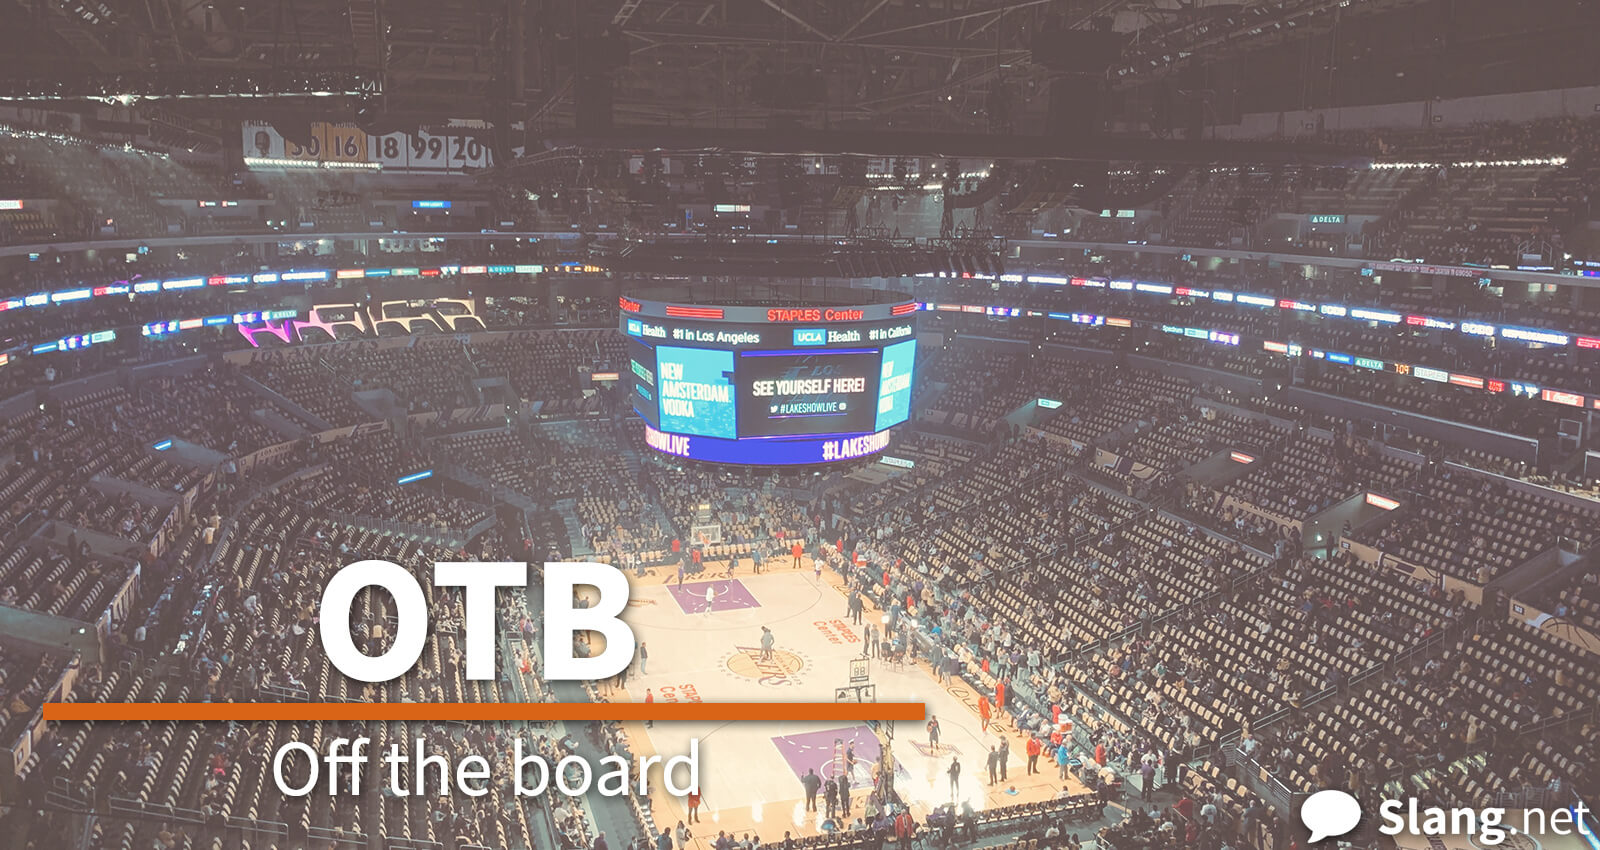 In sports gambling, OTB most commonly means &quot;off the board&quot;